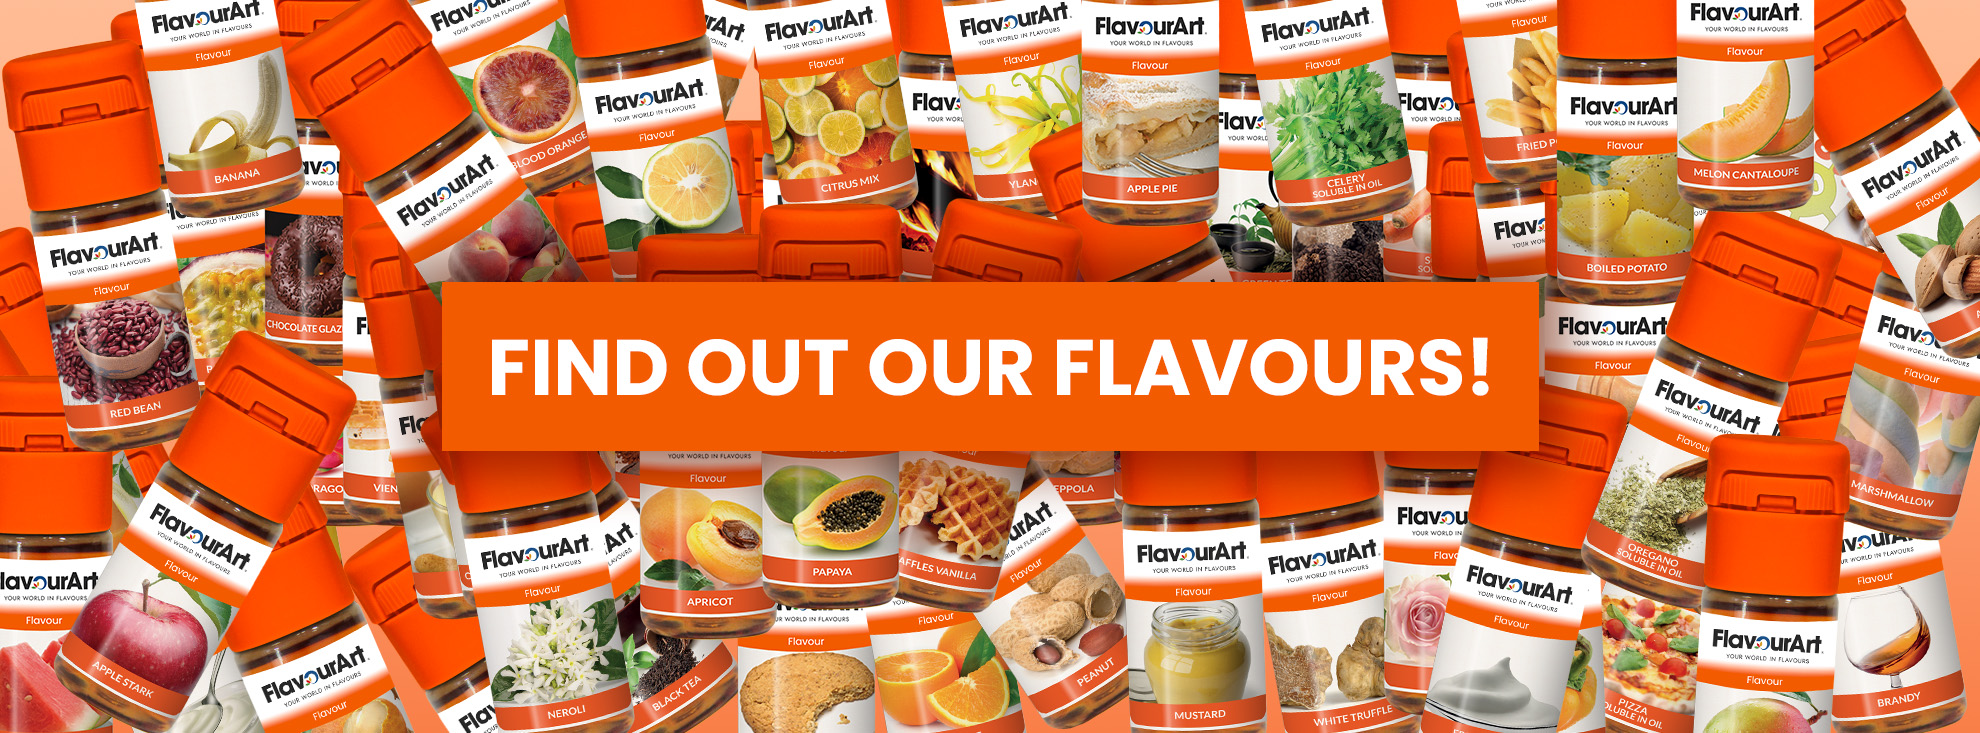 Find out our flavours